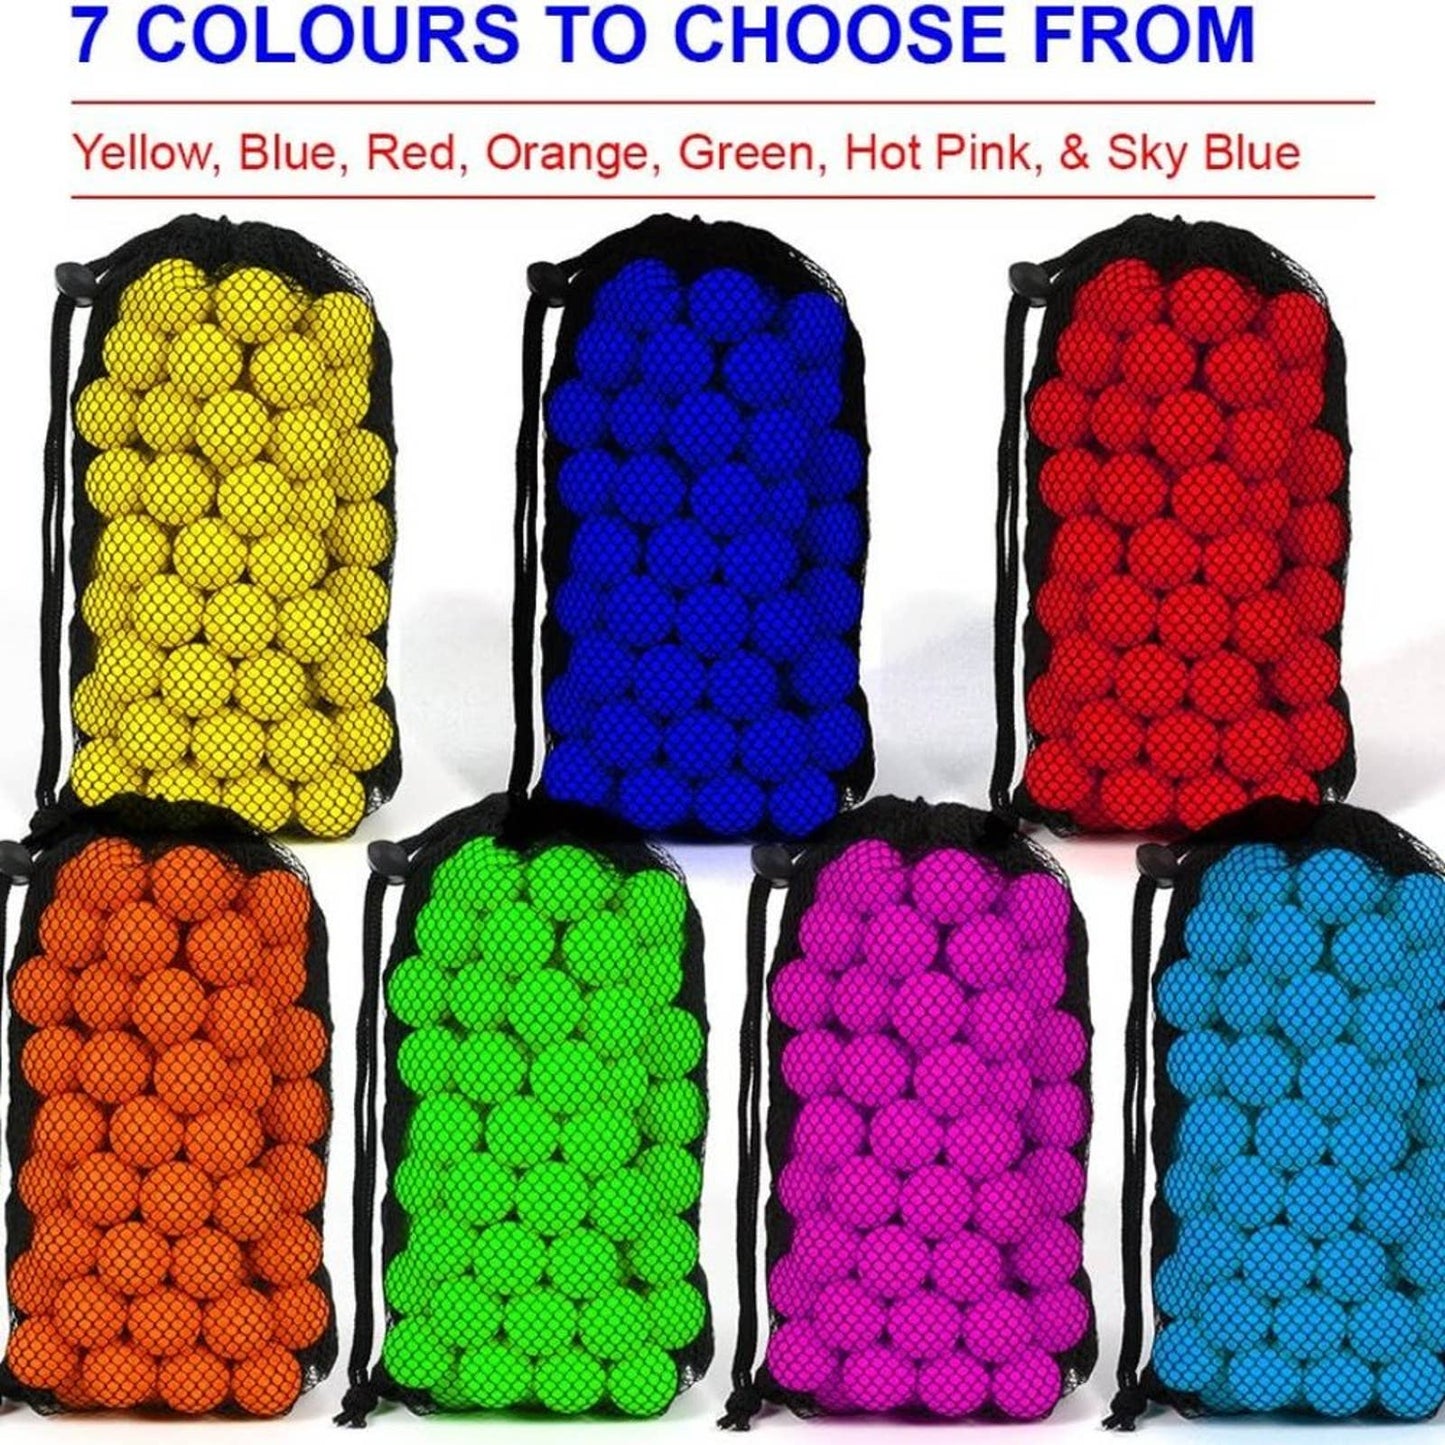 HeadShot Ammo Foam Balls for Toy Gun Refill Pack of Bullets Compatible with Nerf